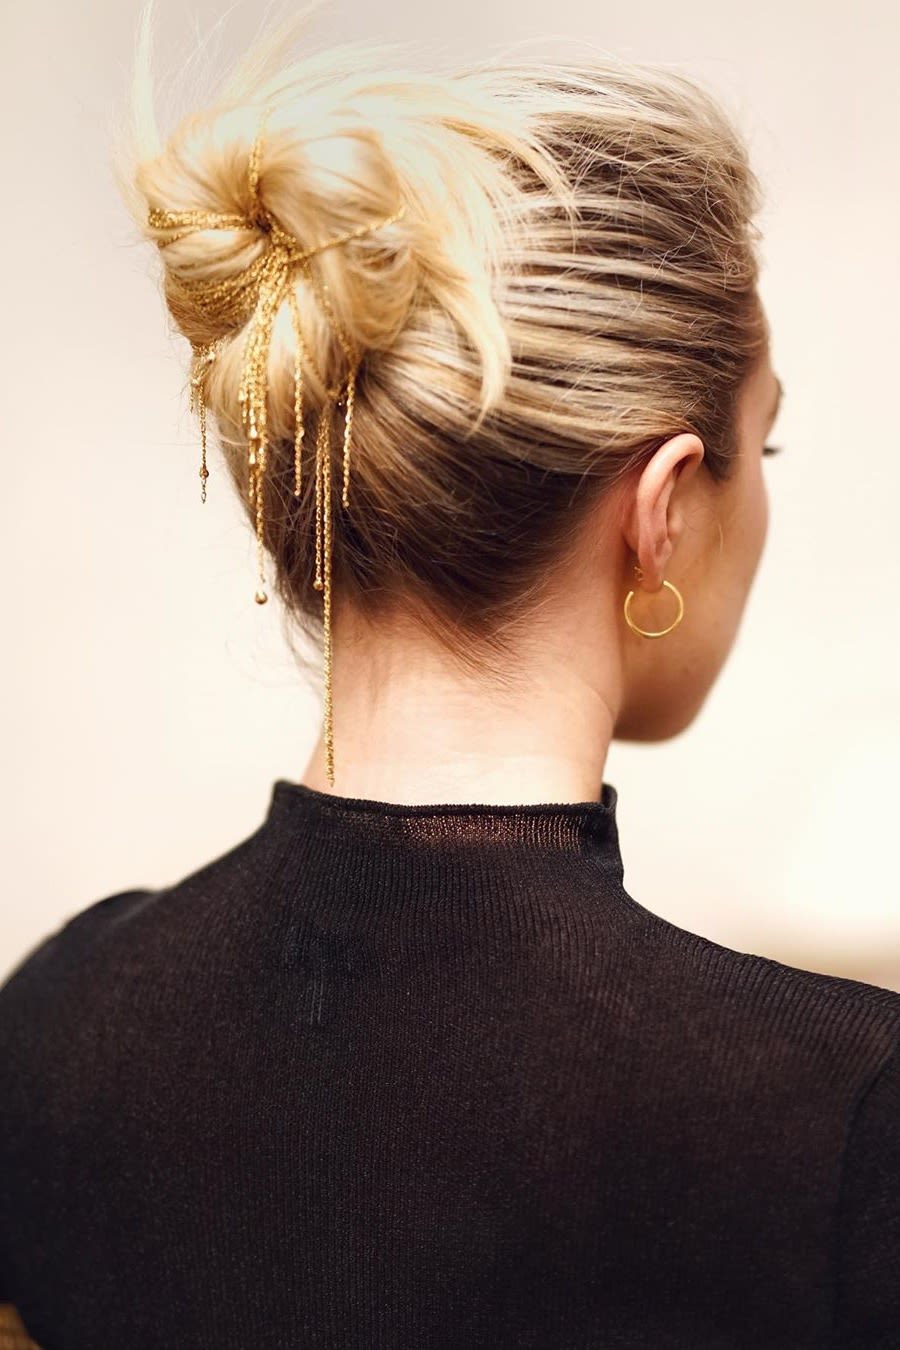 Florence Pugh's Intricate, Exquisite Updos (And What | Into The Gloss